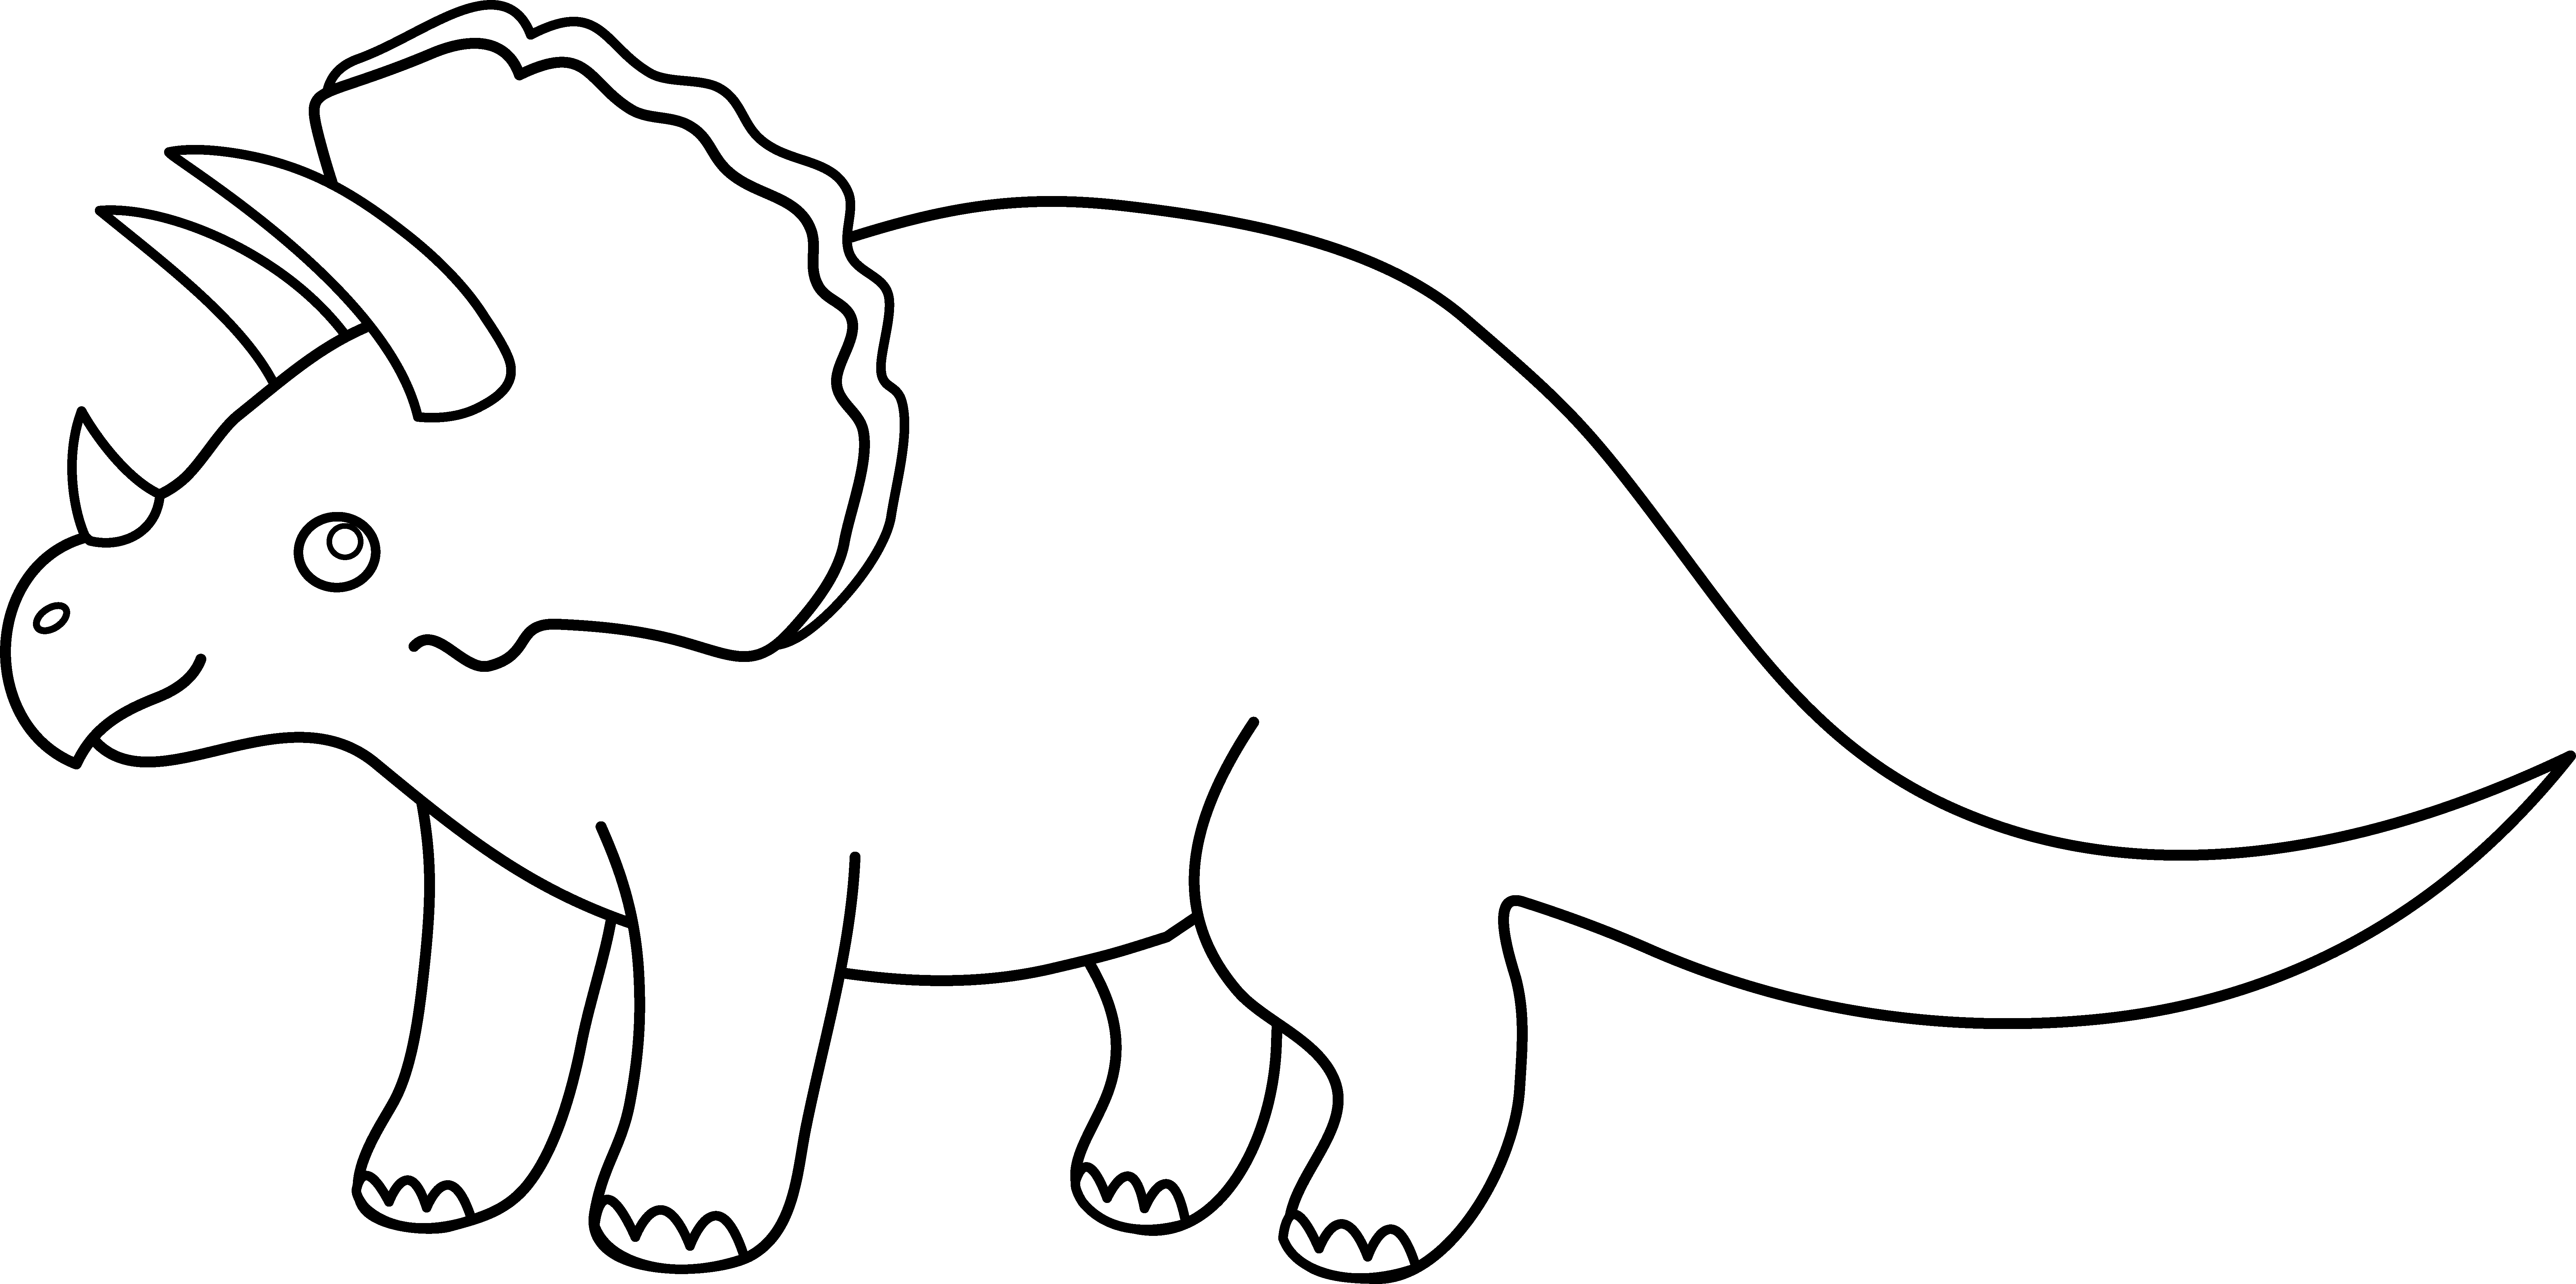 Triceratops clipart #3, Download drawings